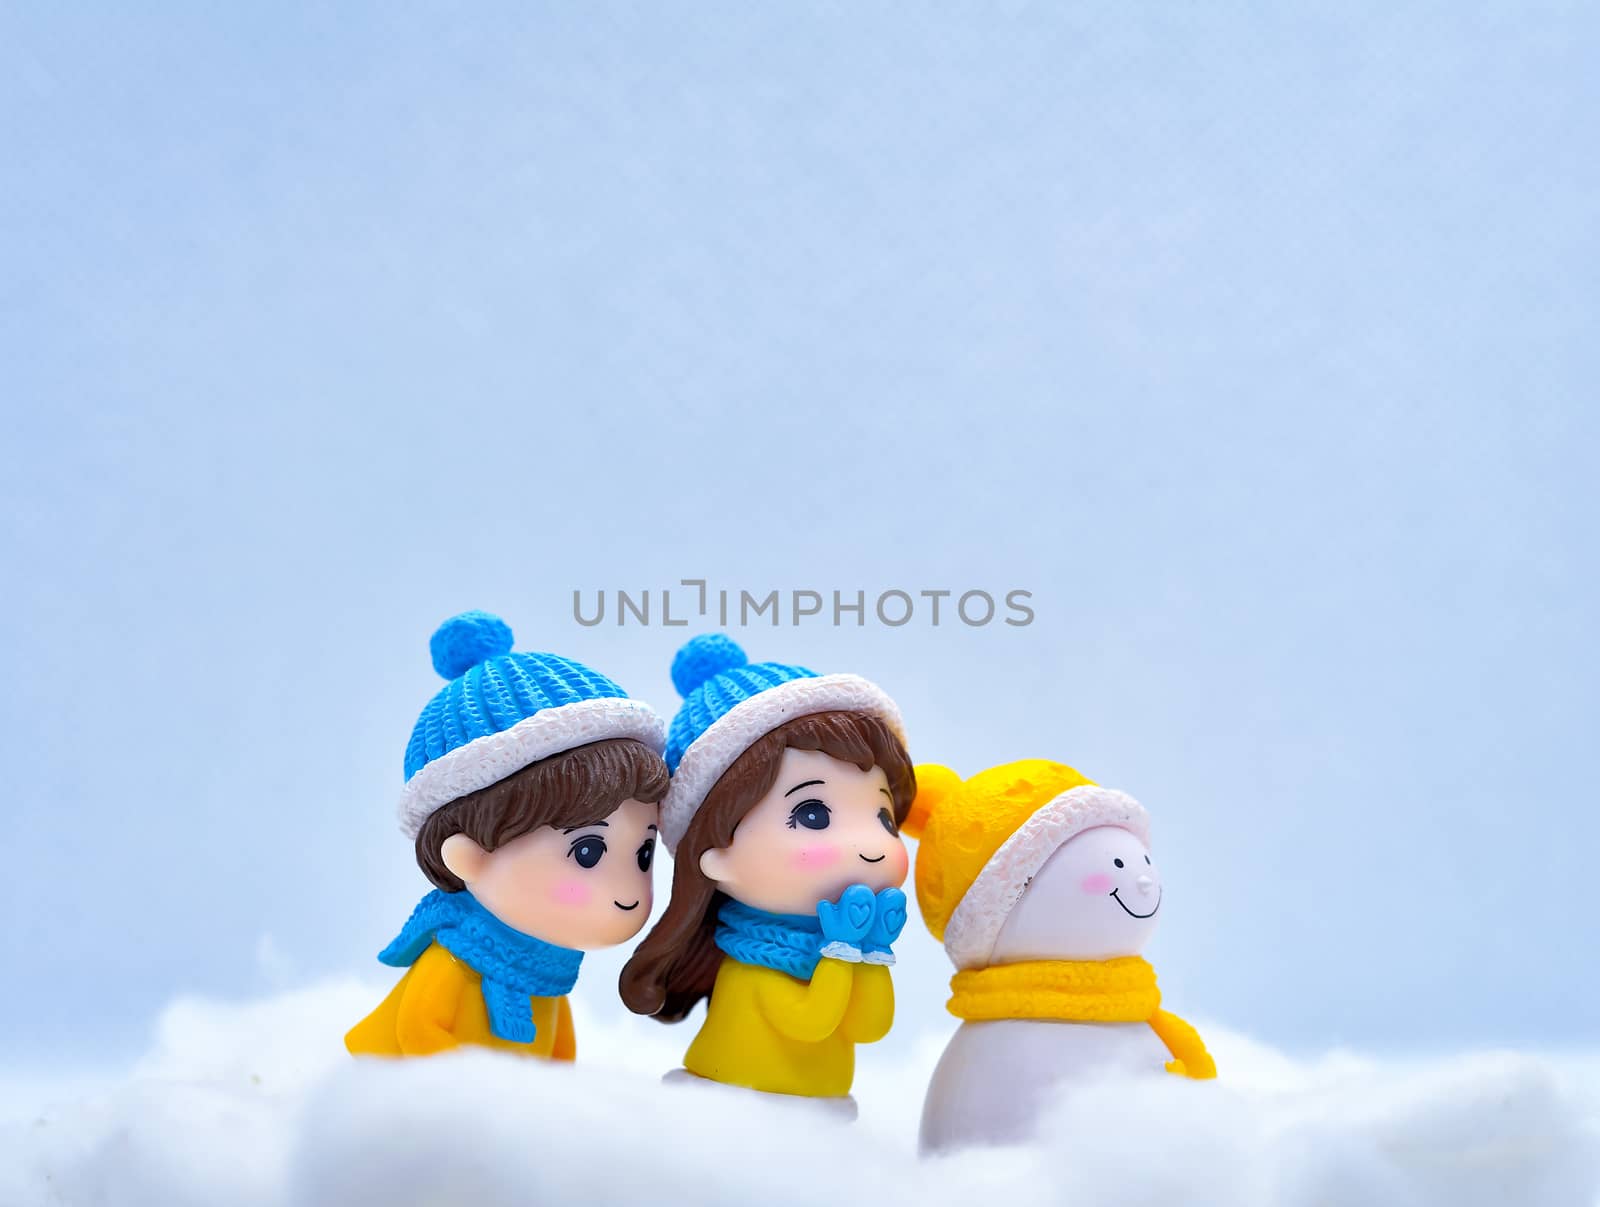 Tourism and travel concept: Miniature people looking for something in winter snow along with little snowman